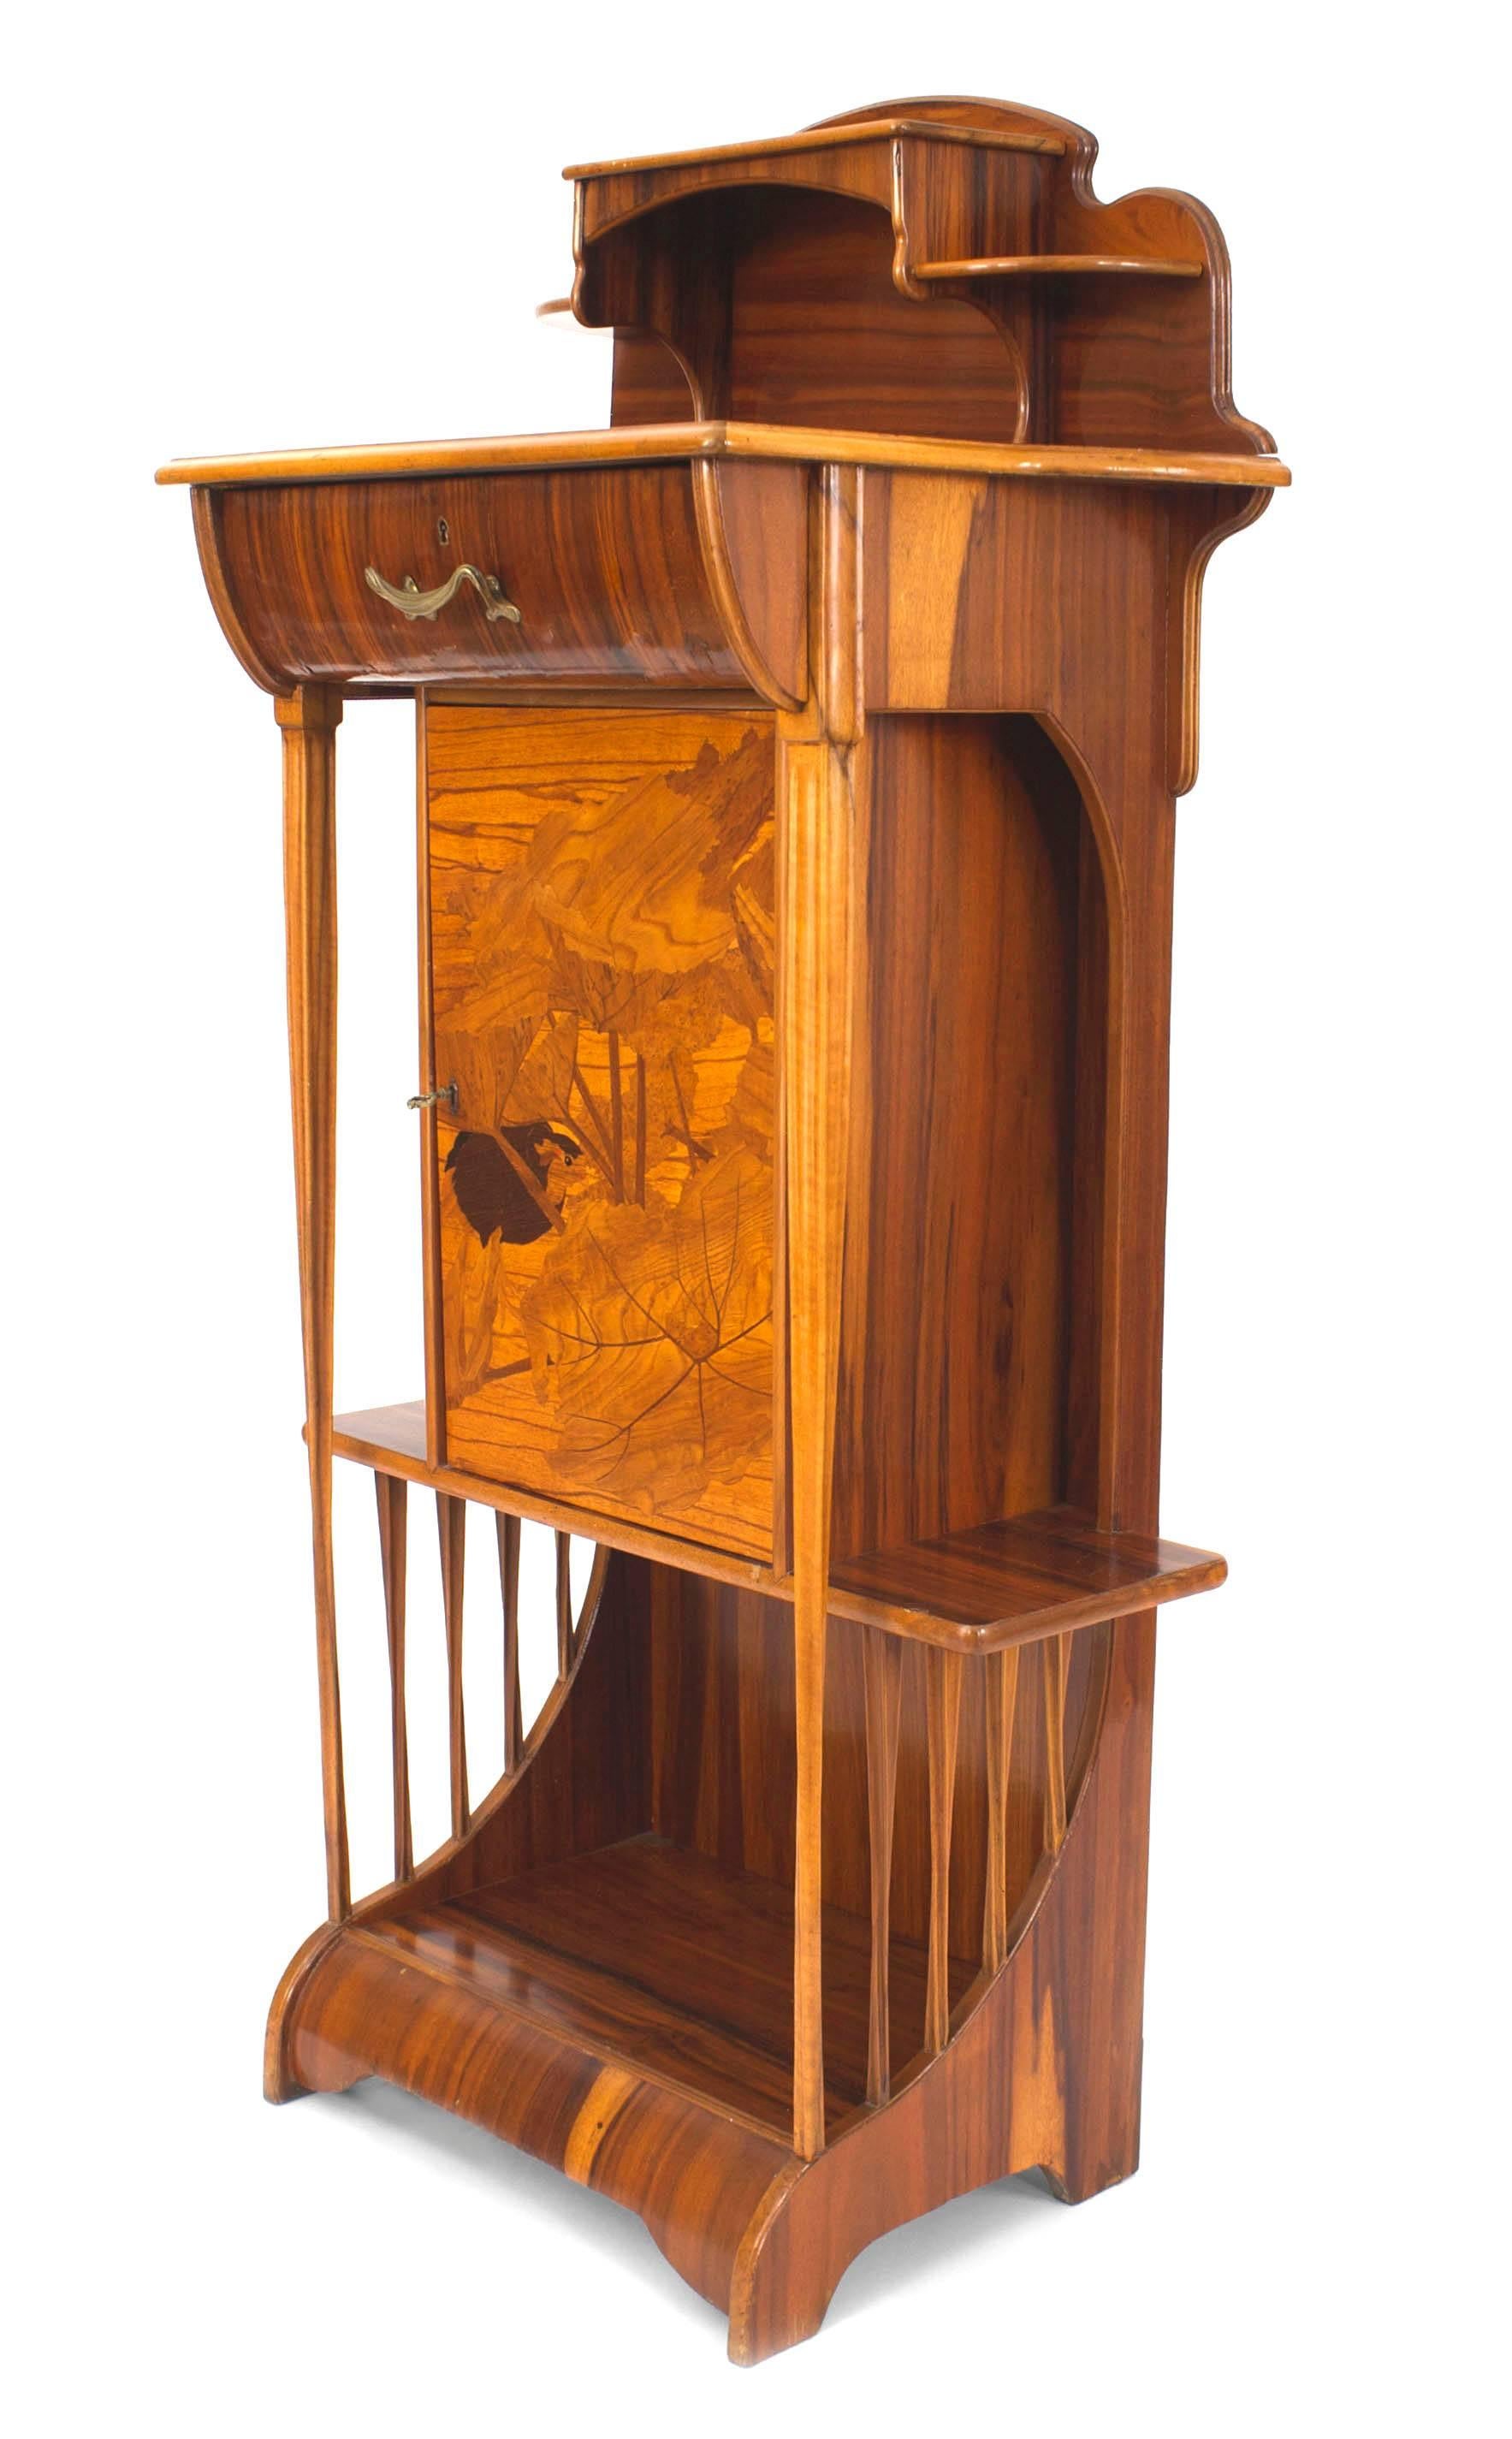 French Art Nouveau rosewood diminutive narrow cabinet with an upper & bottom shelf with side shelves centering a drawer & door having an inlaid bird & forest scene. (MAJORELLE)
